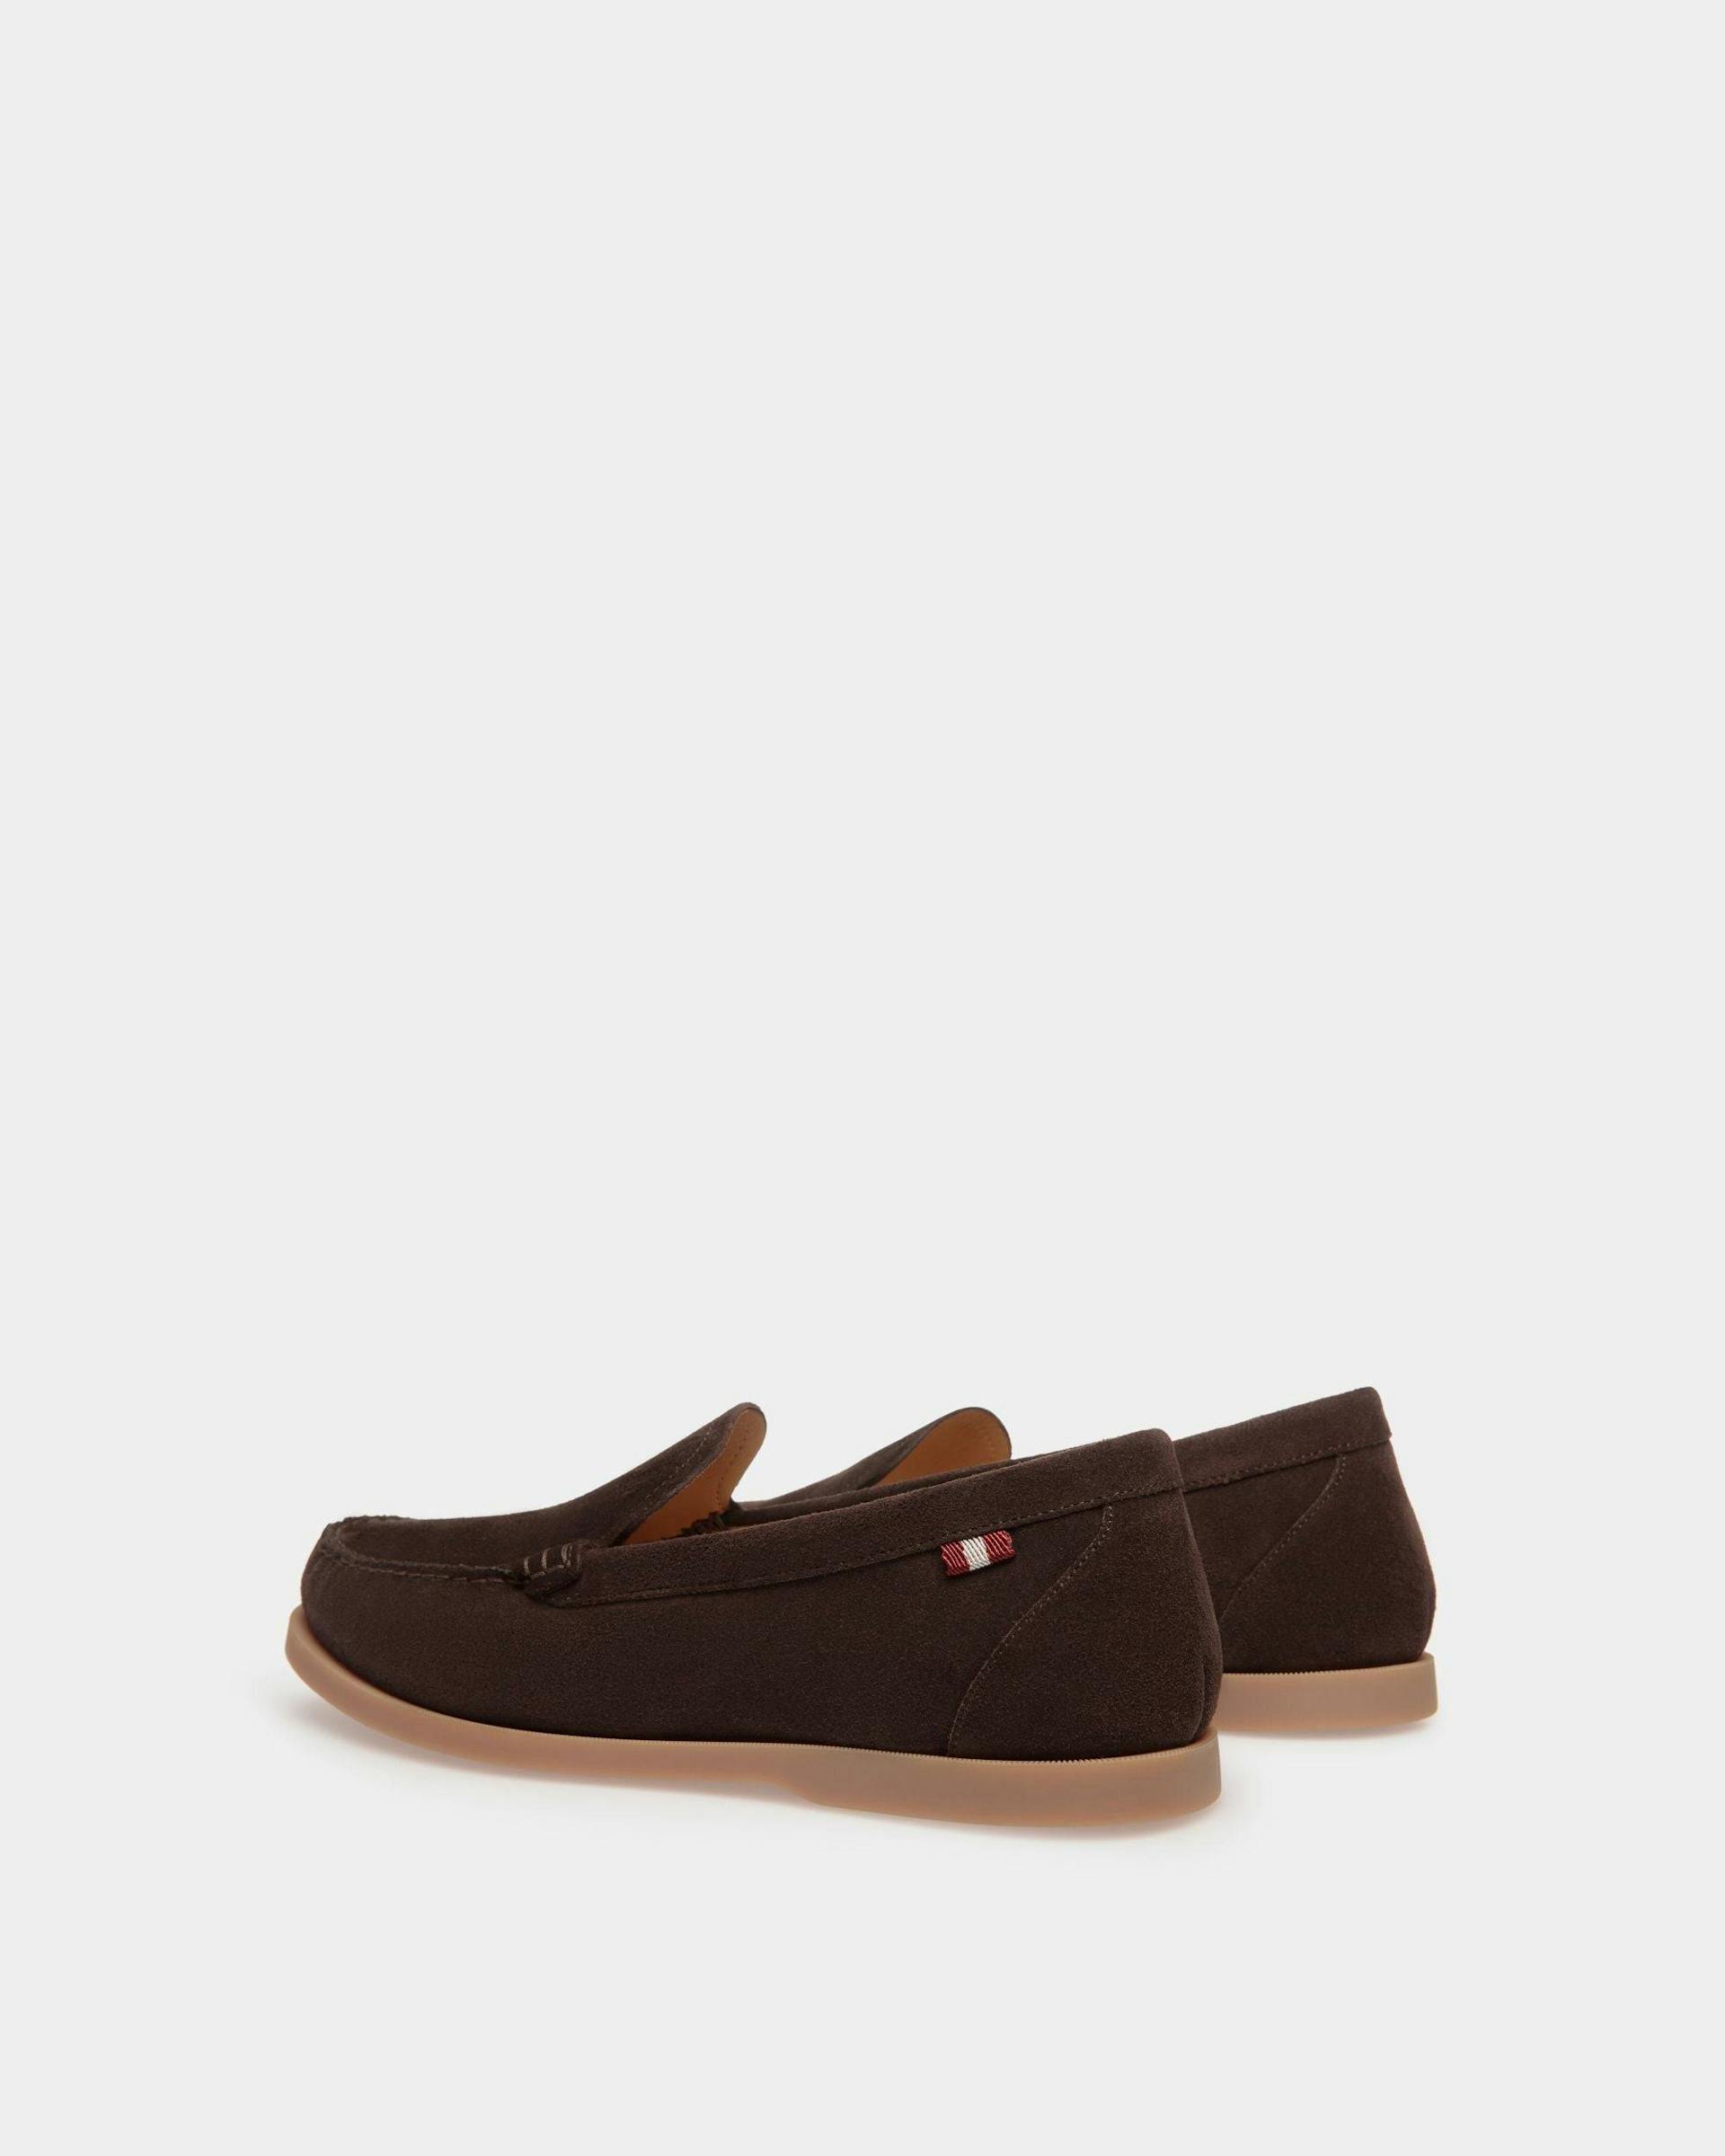 Men's Nelson Loafer in Brown Suede | Bally | Still Life 3/4 Back